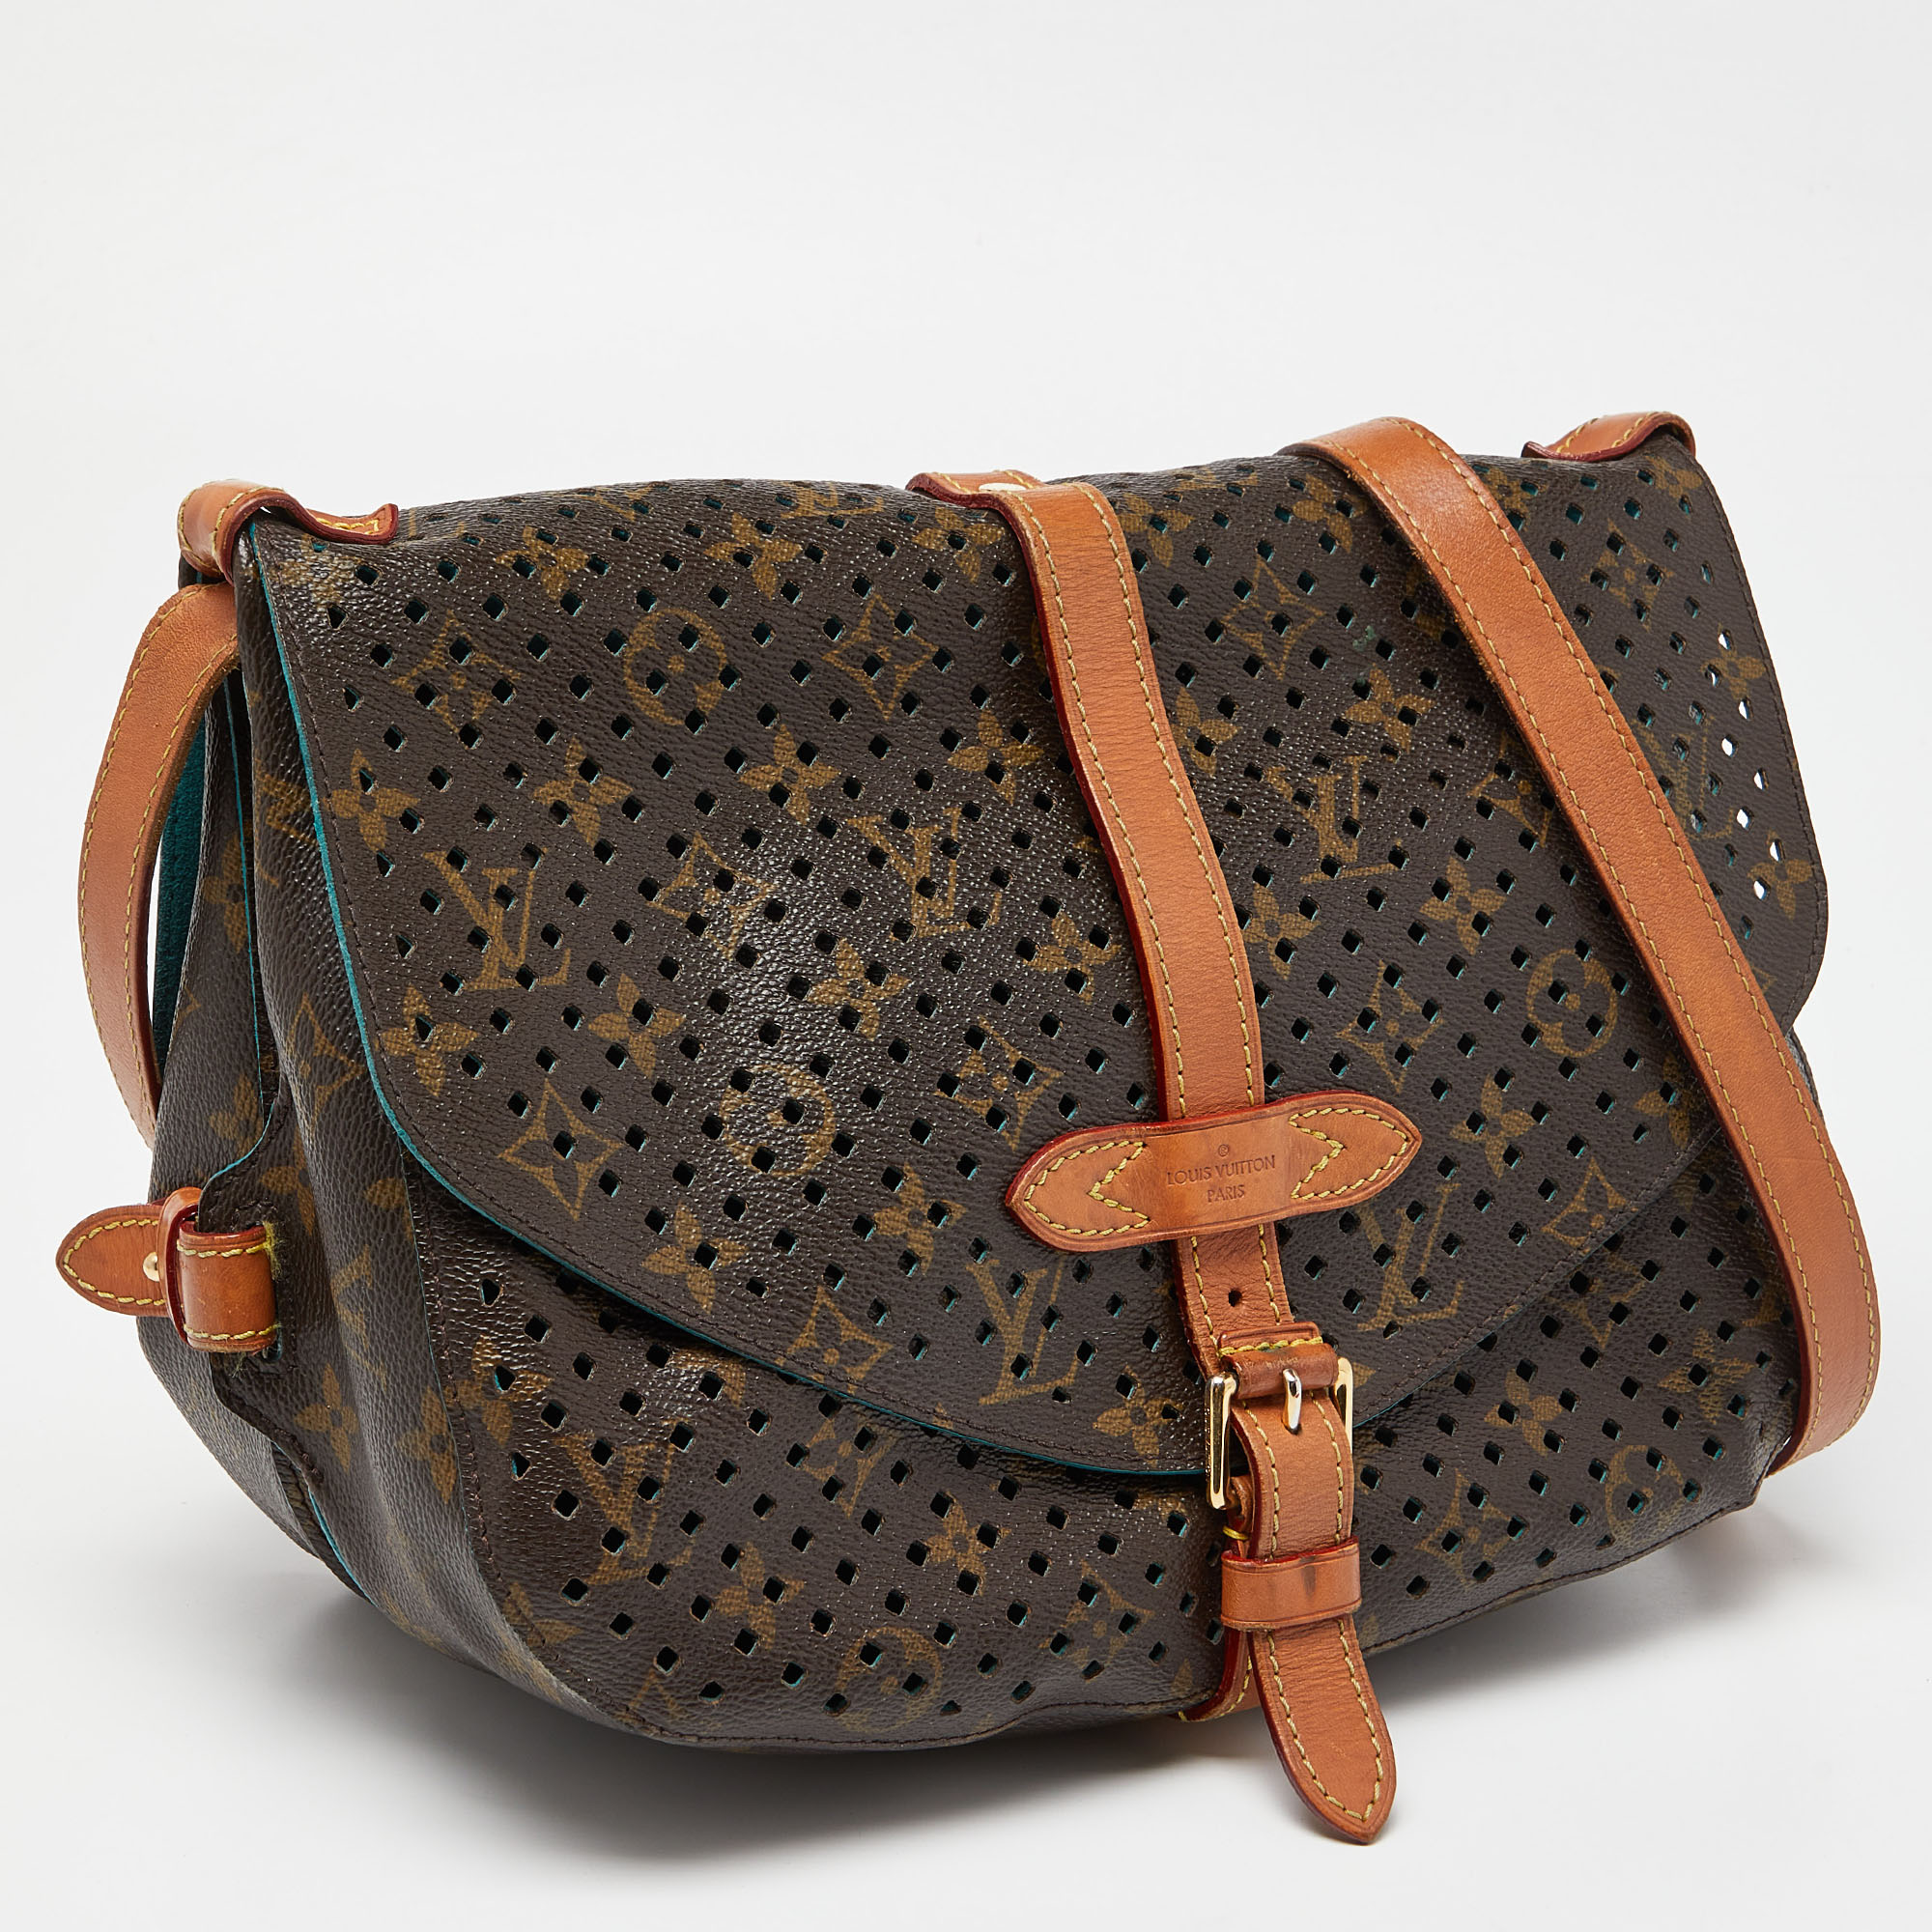 Louis Vuitton Perforated Monogram Canvas And Leather Saumur 30 Bag